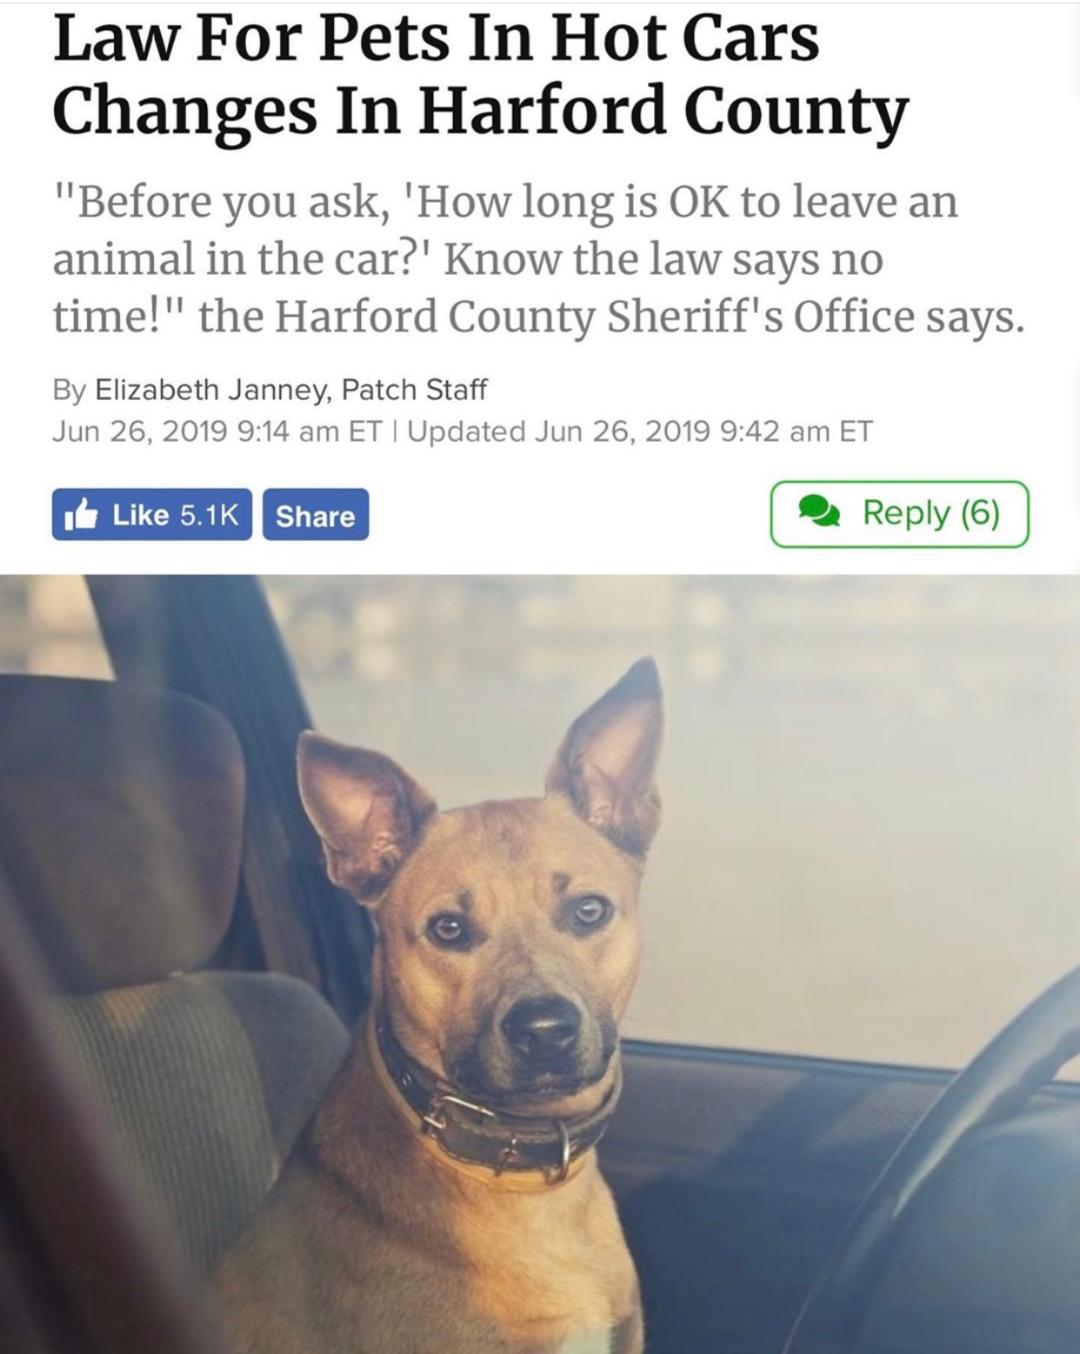 LAW FOR PETS IN HOT CARS CHANGES IN HARFORD MD!